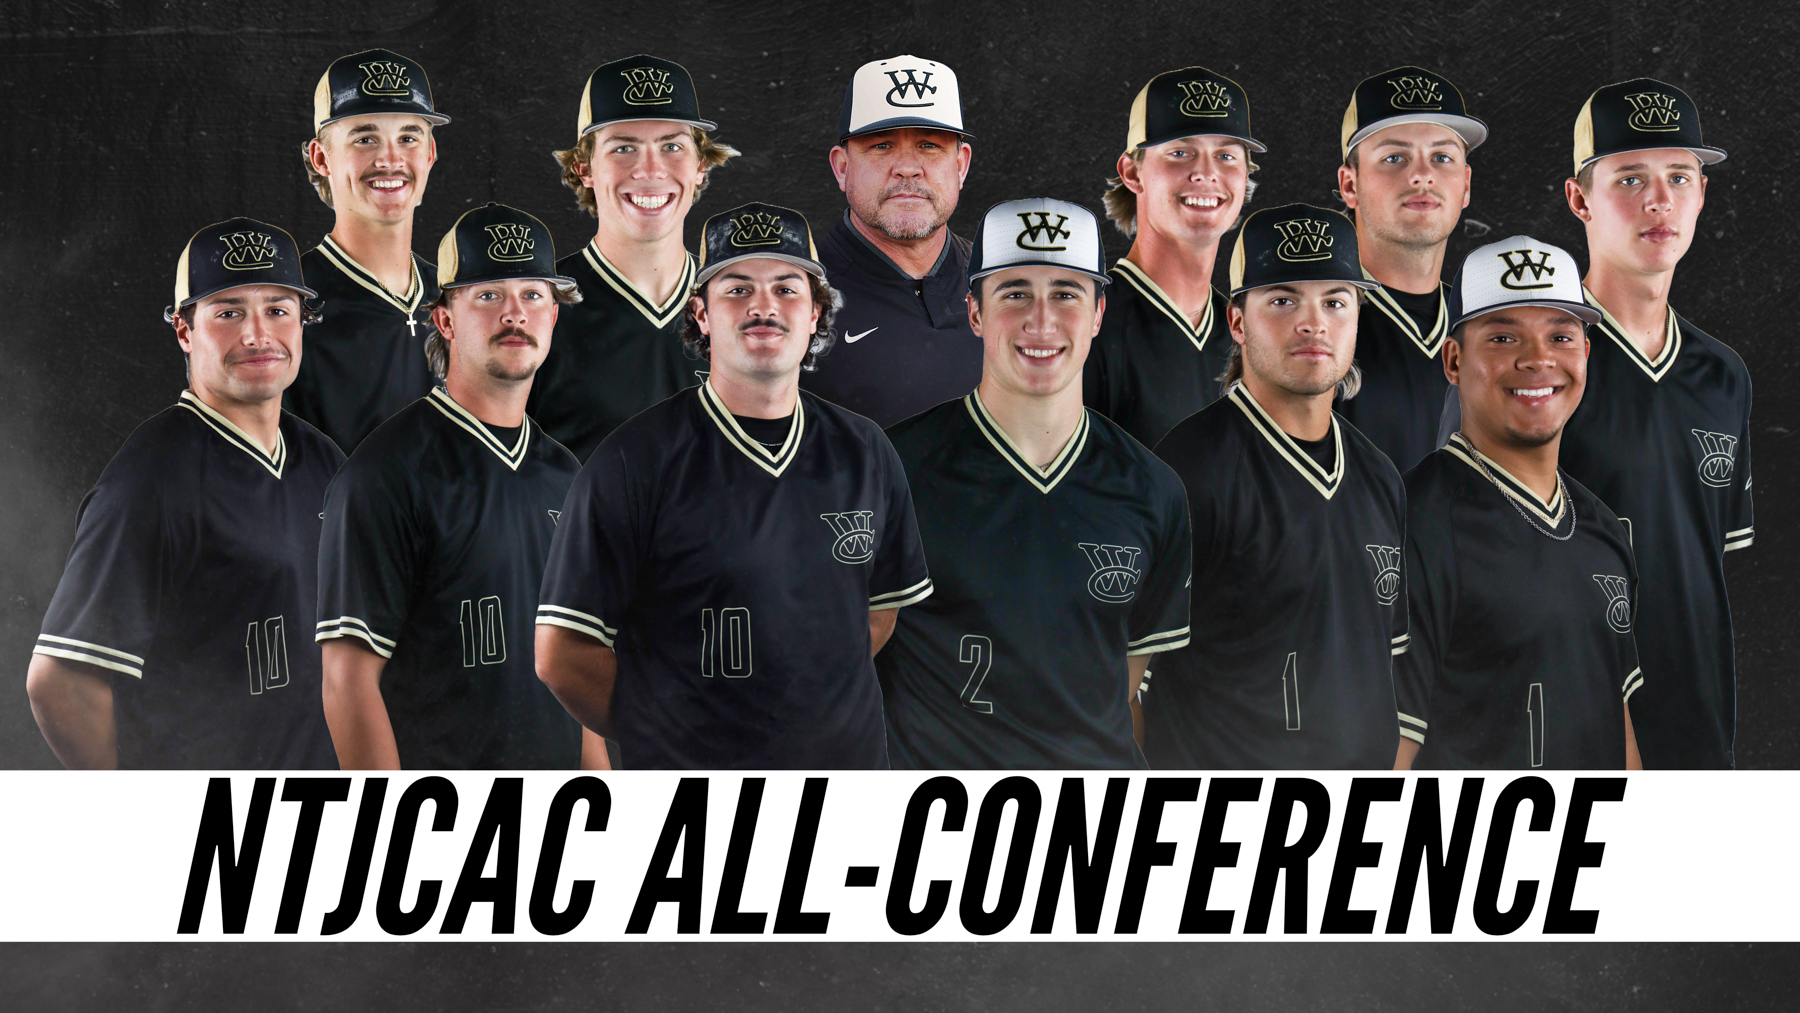 WC dominates all-conference list